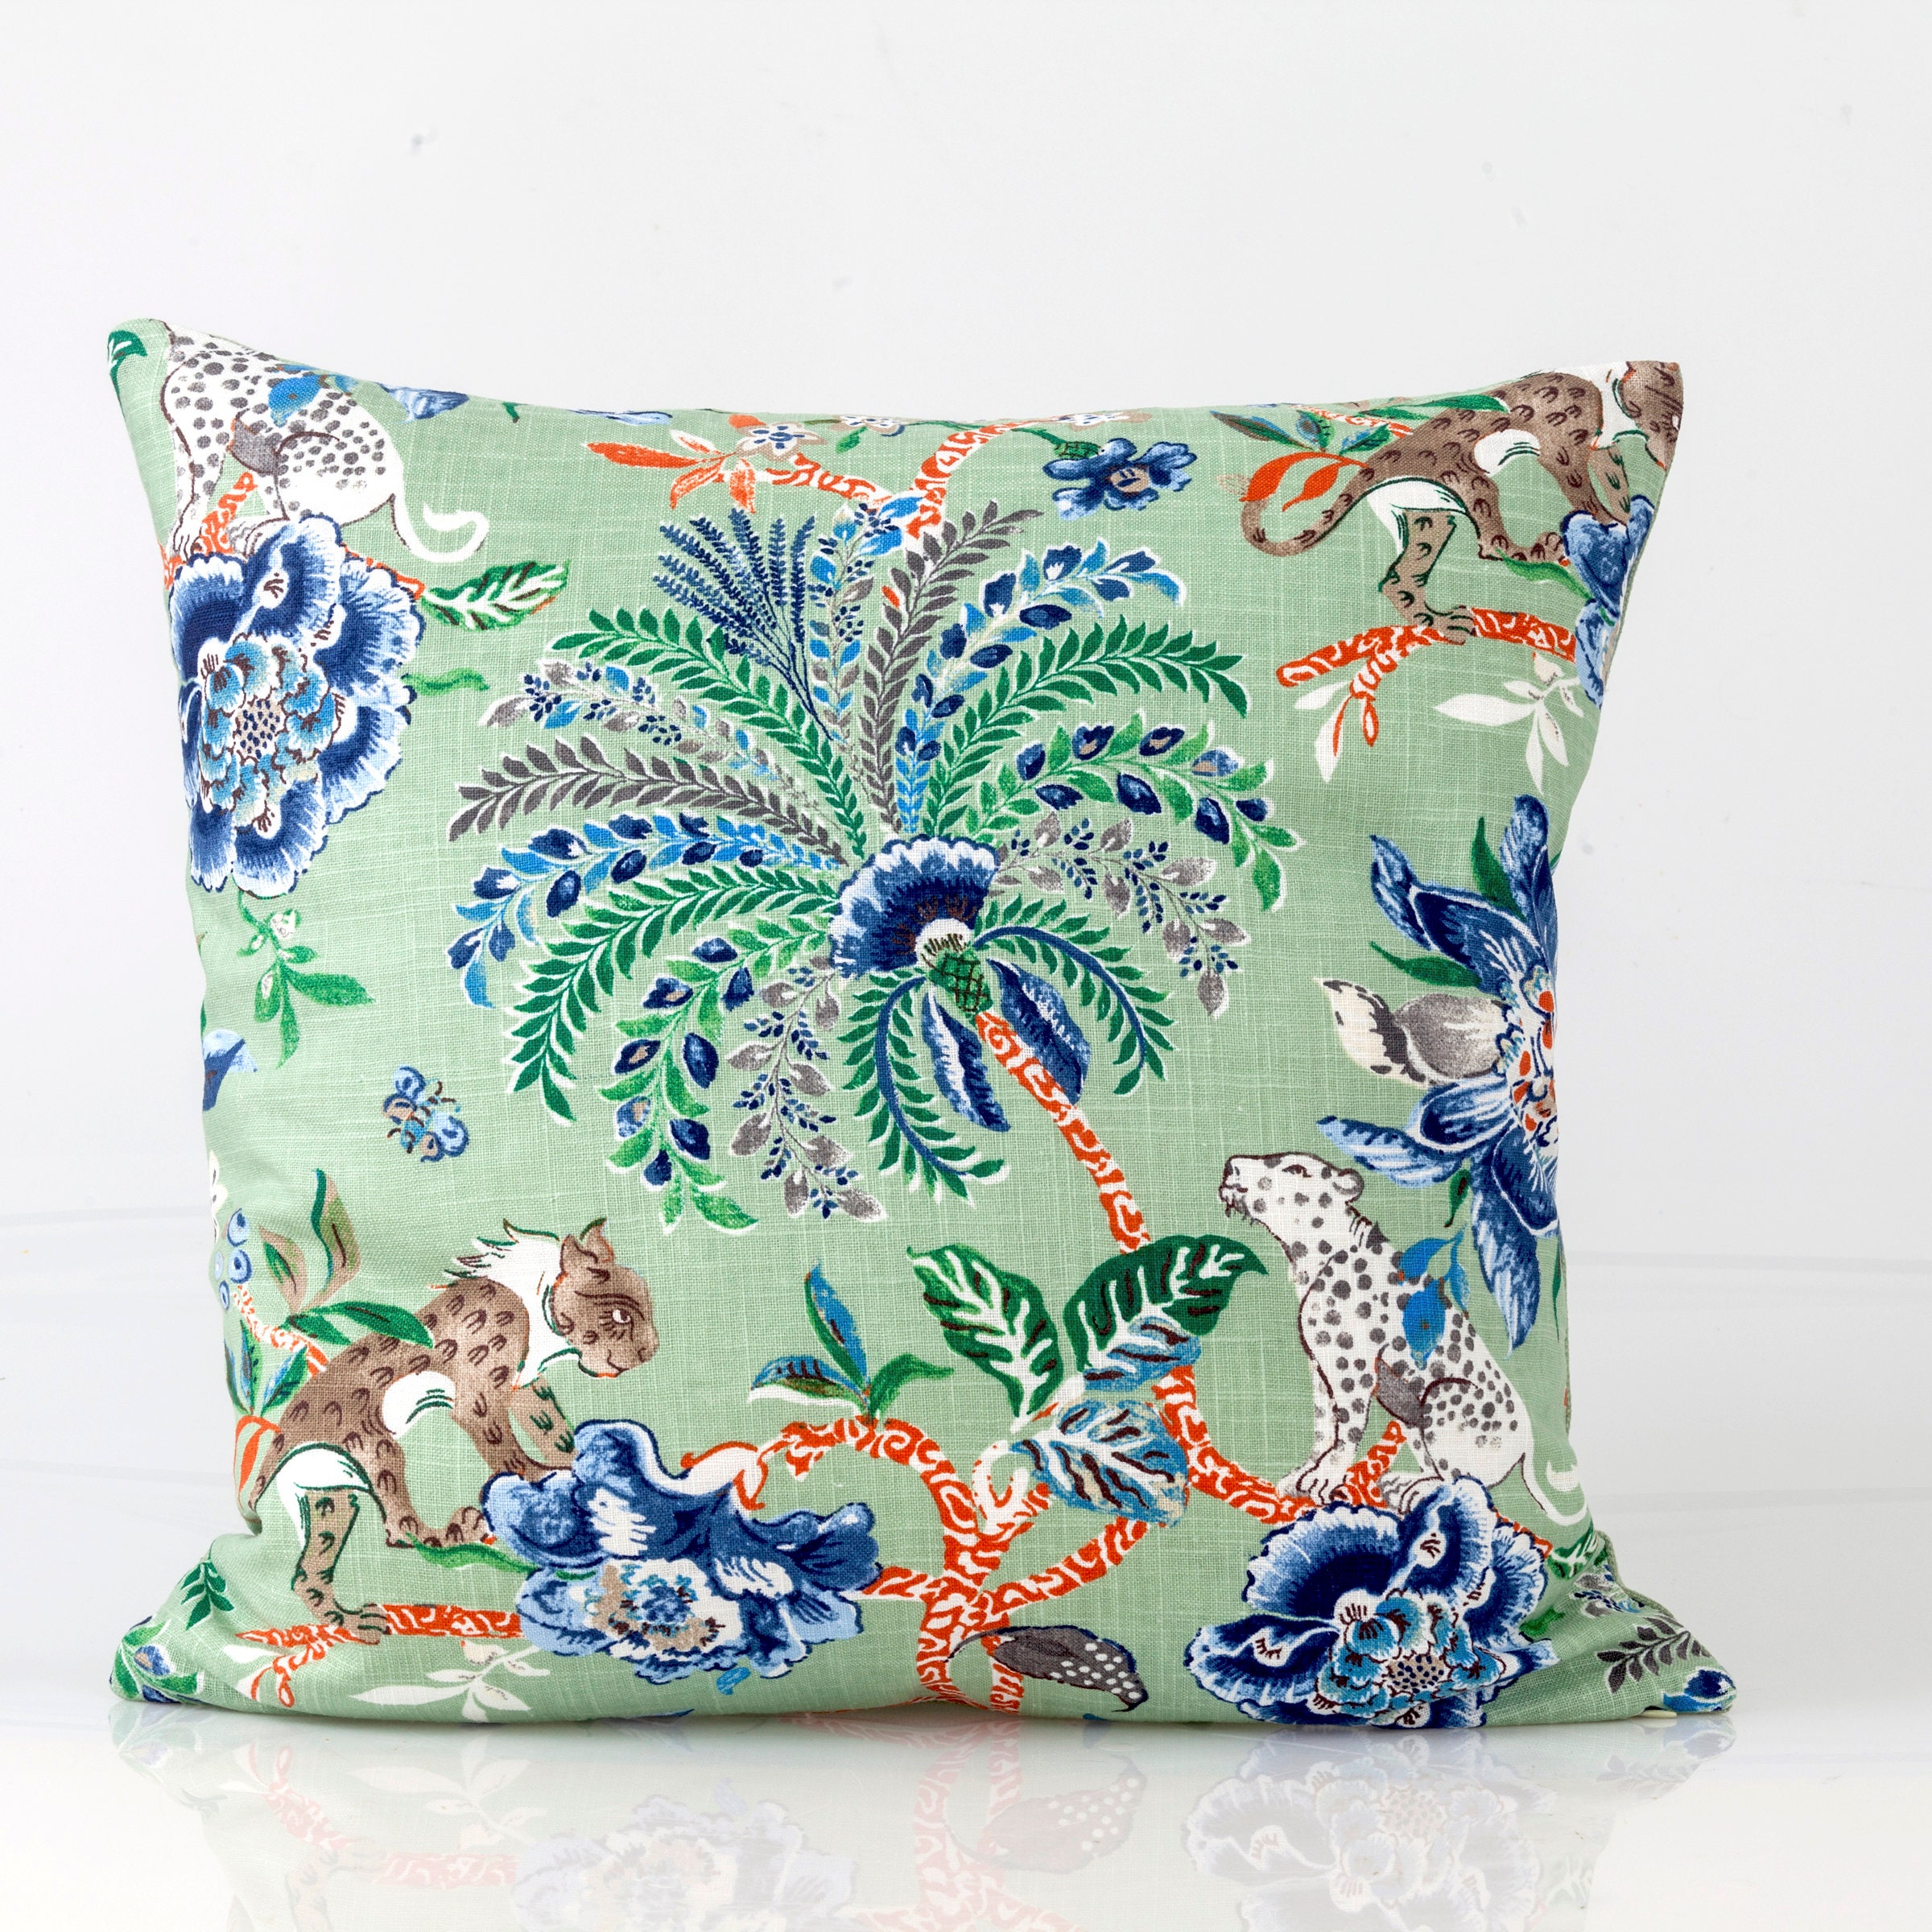 Chinese Temple Lumbar Pillow Cover Chinoiserie Pagoda Asian Lumbar Pillow  12x16, 12x20, 14x20, 14x22, 14x36, 15x30 